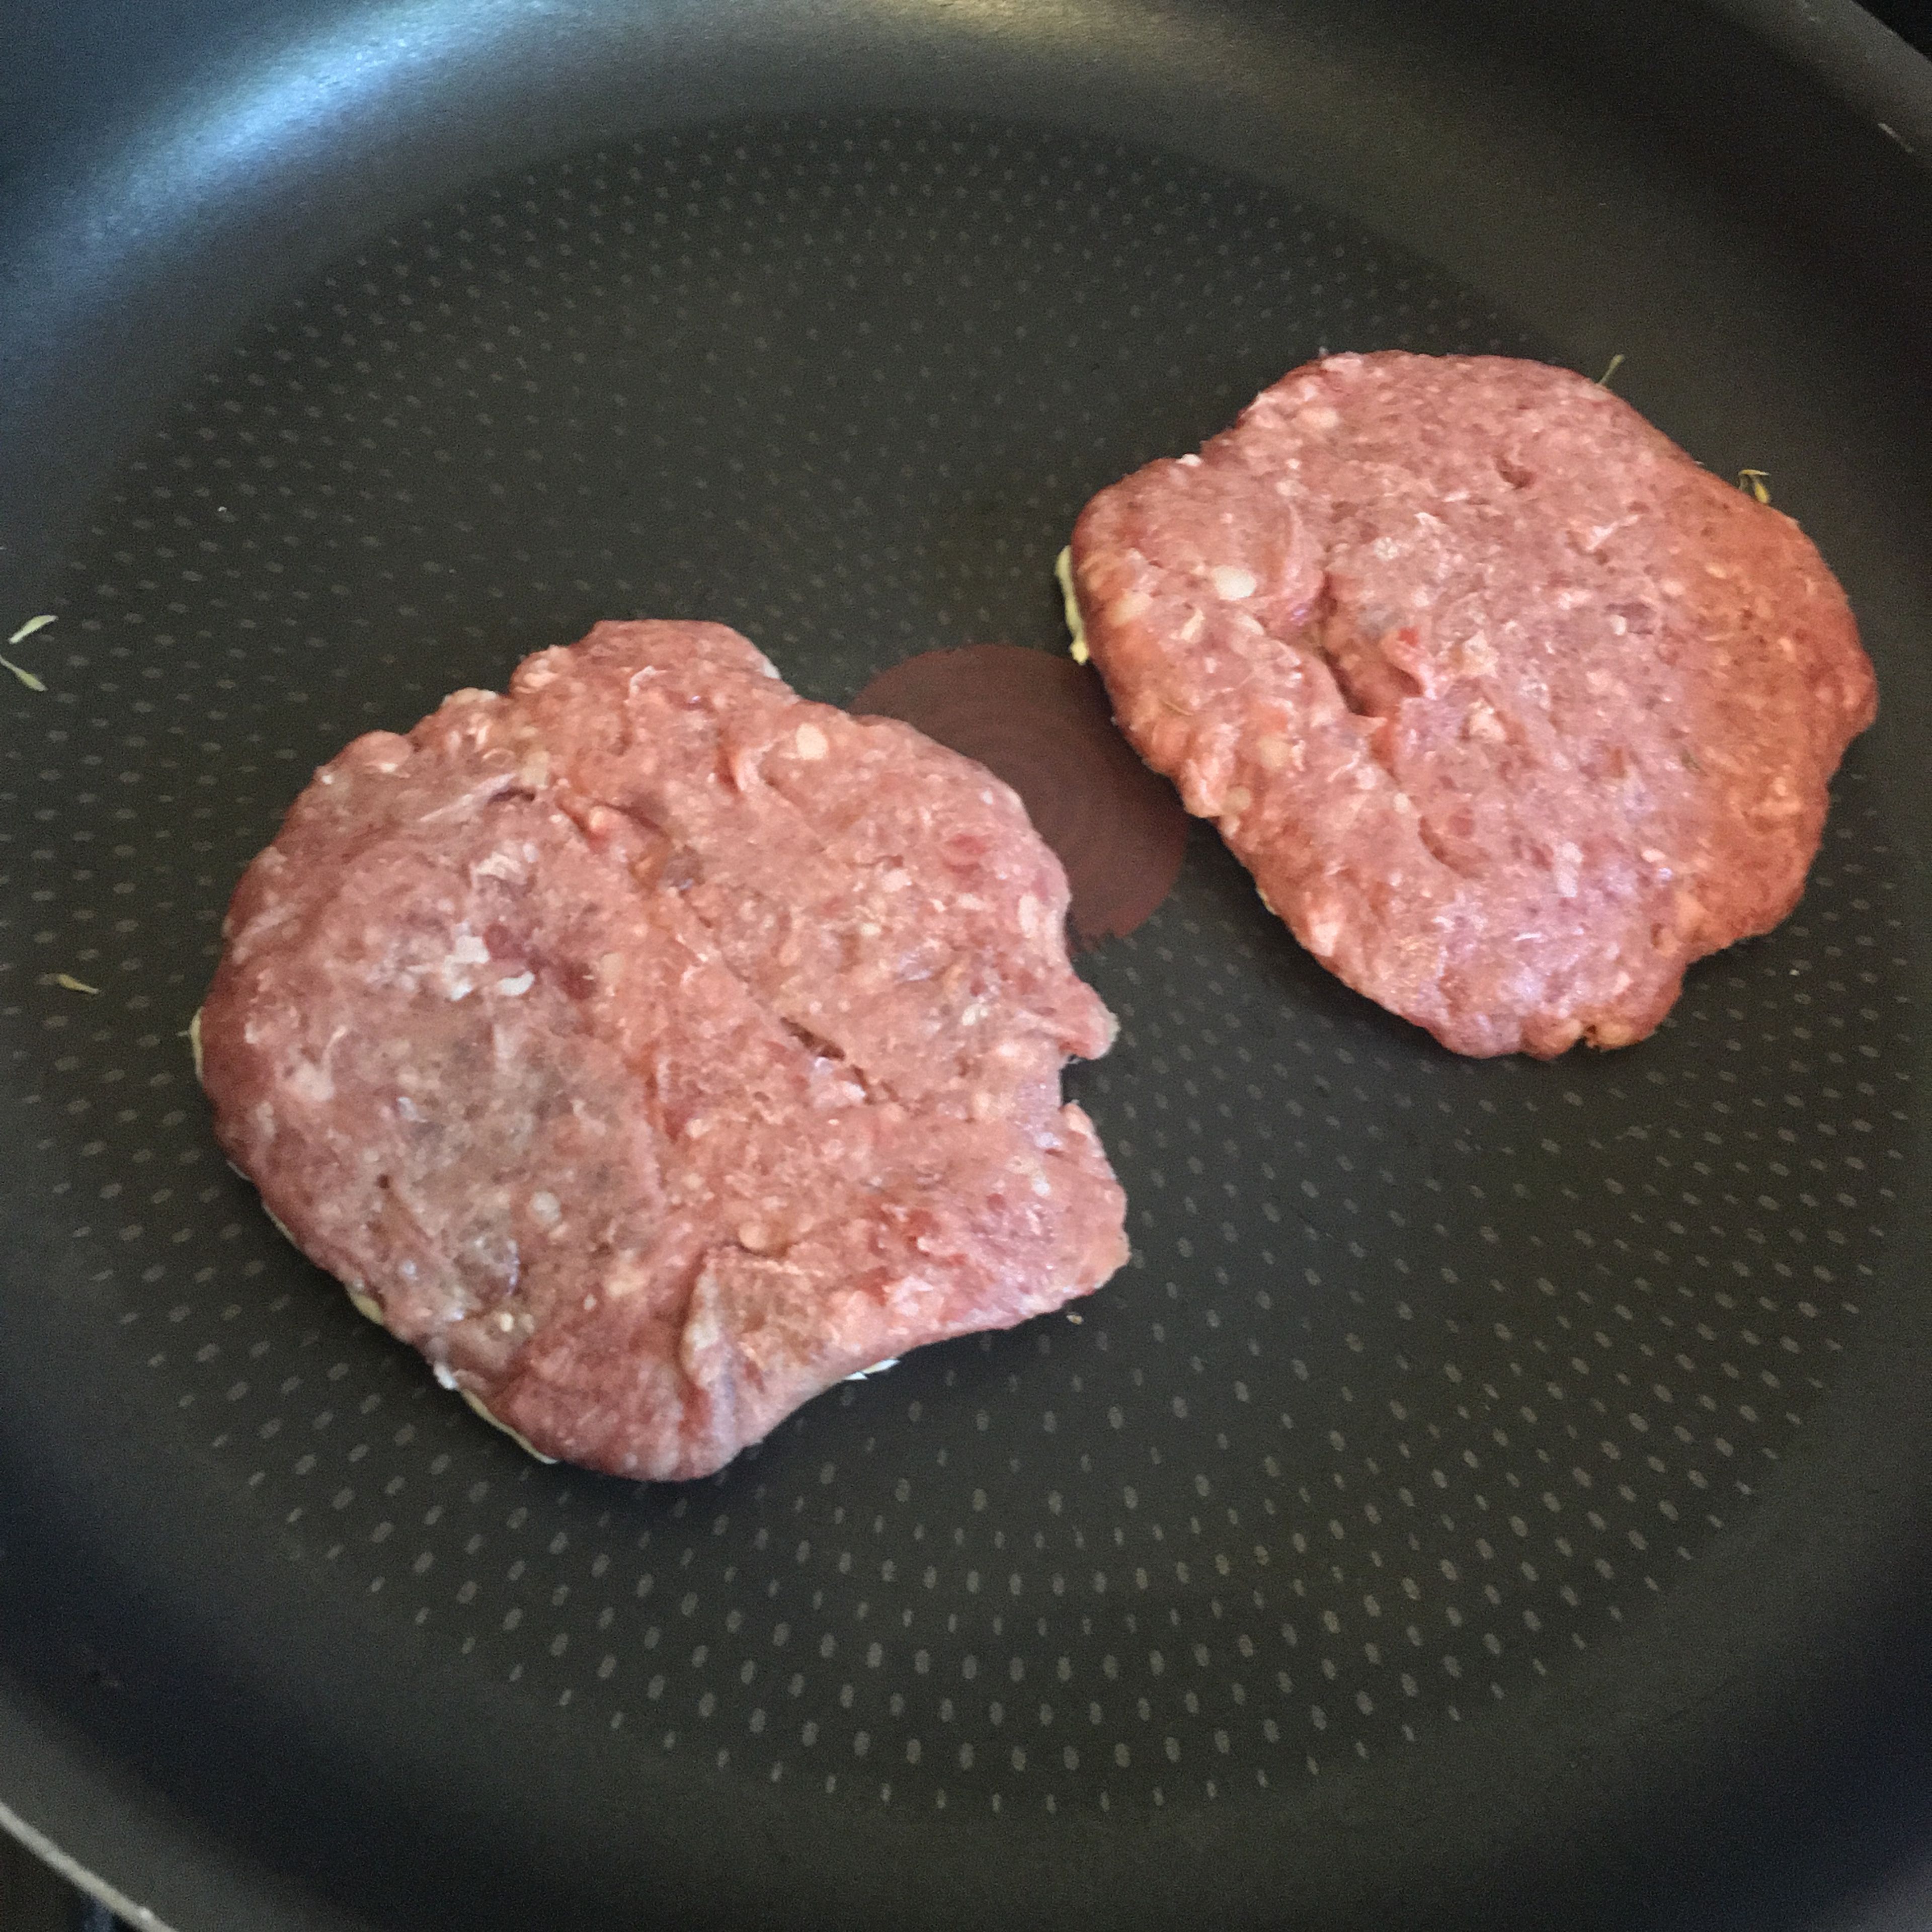 In a pan over high heat, put the burgers face down so the side with the butter on starts cooking first. Time these to cook for 5 minutes.